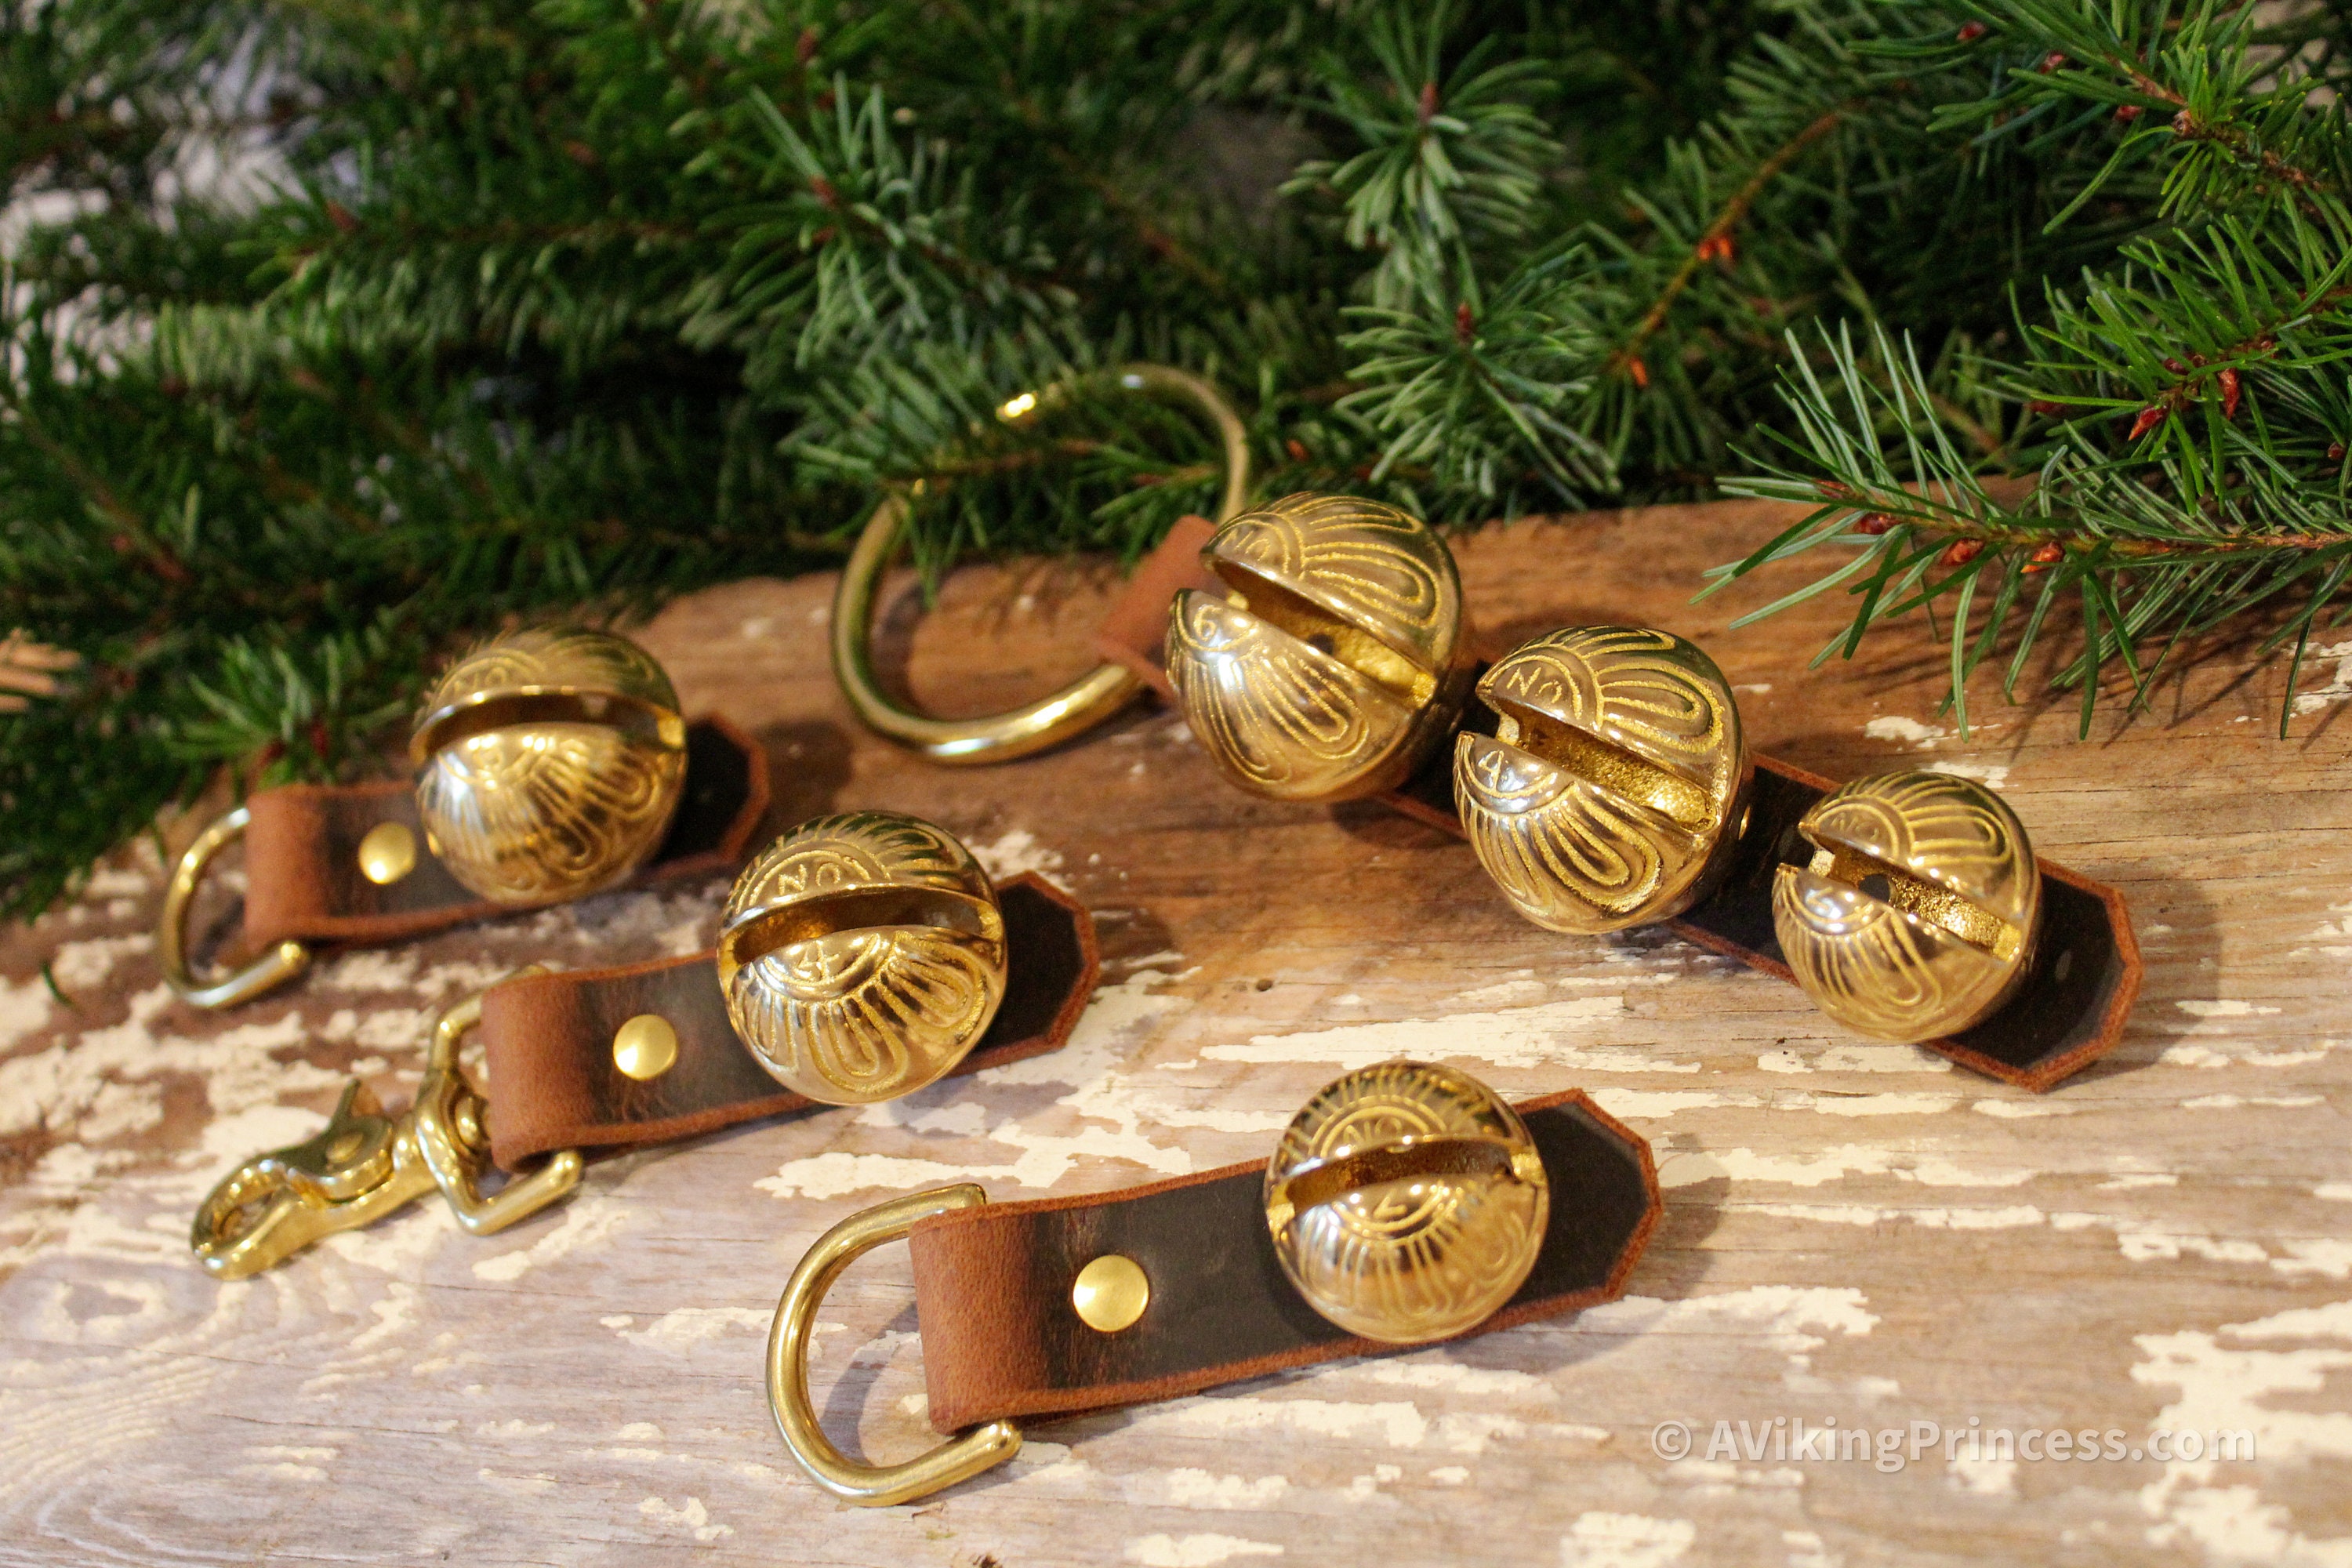 Individual Traditional Solid Brass Sleigh Bells - BELLS ONLY